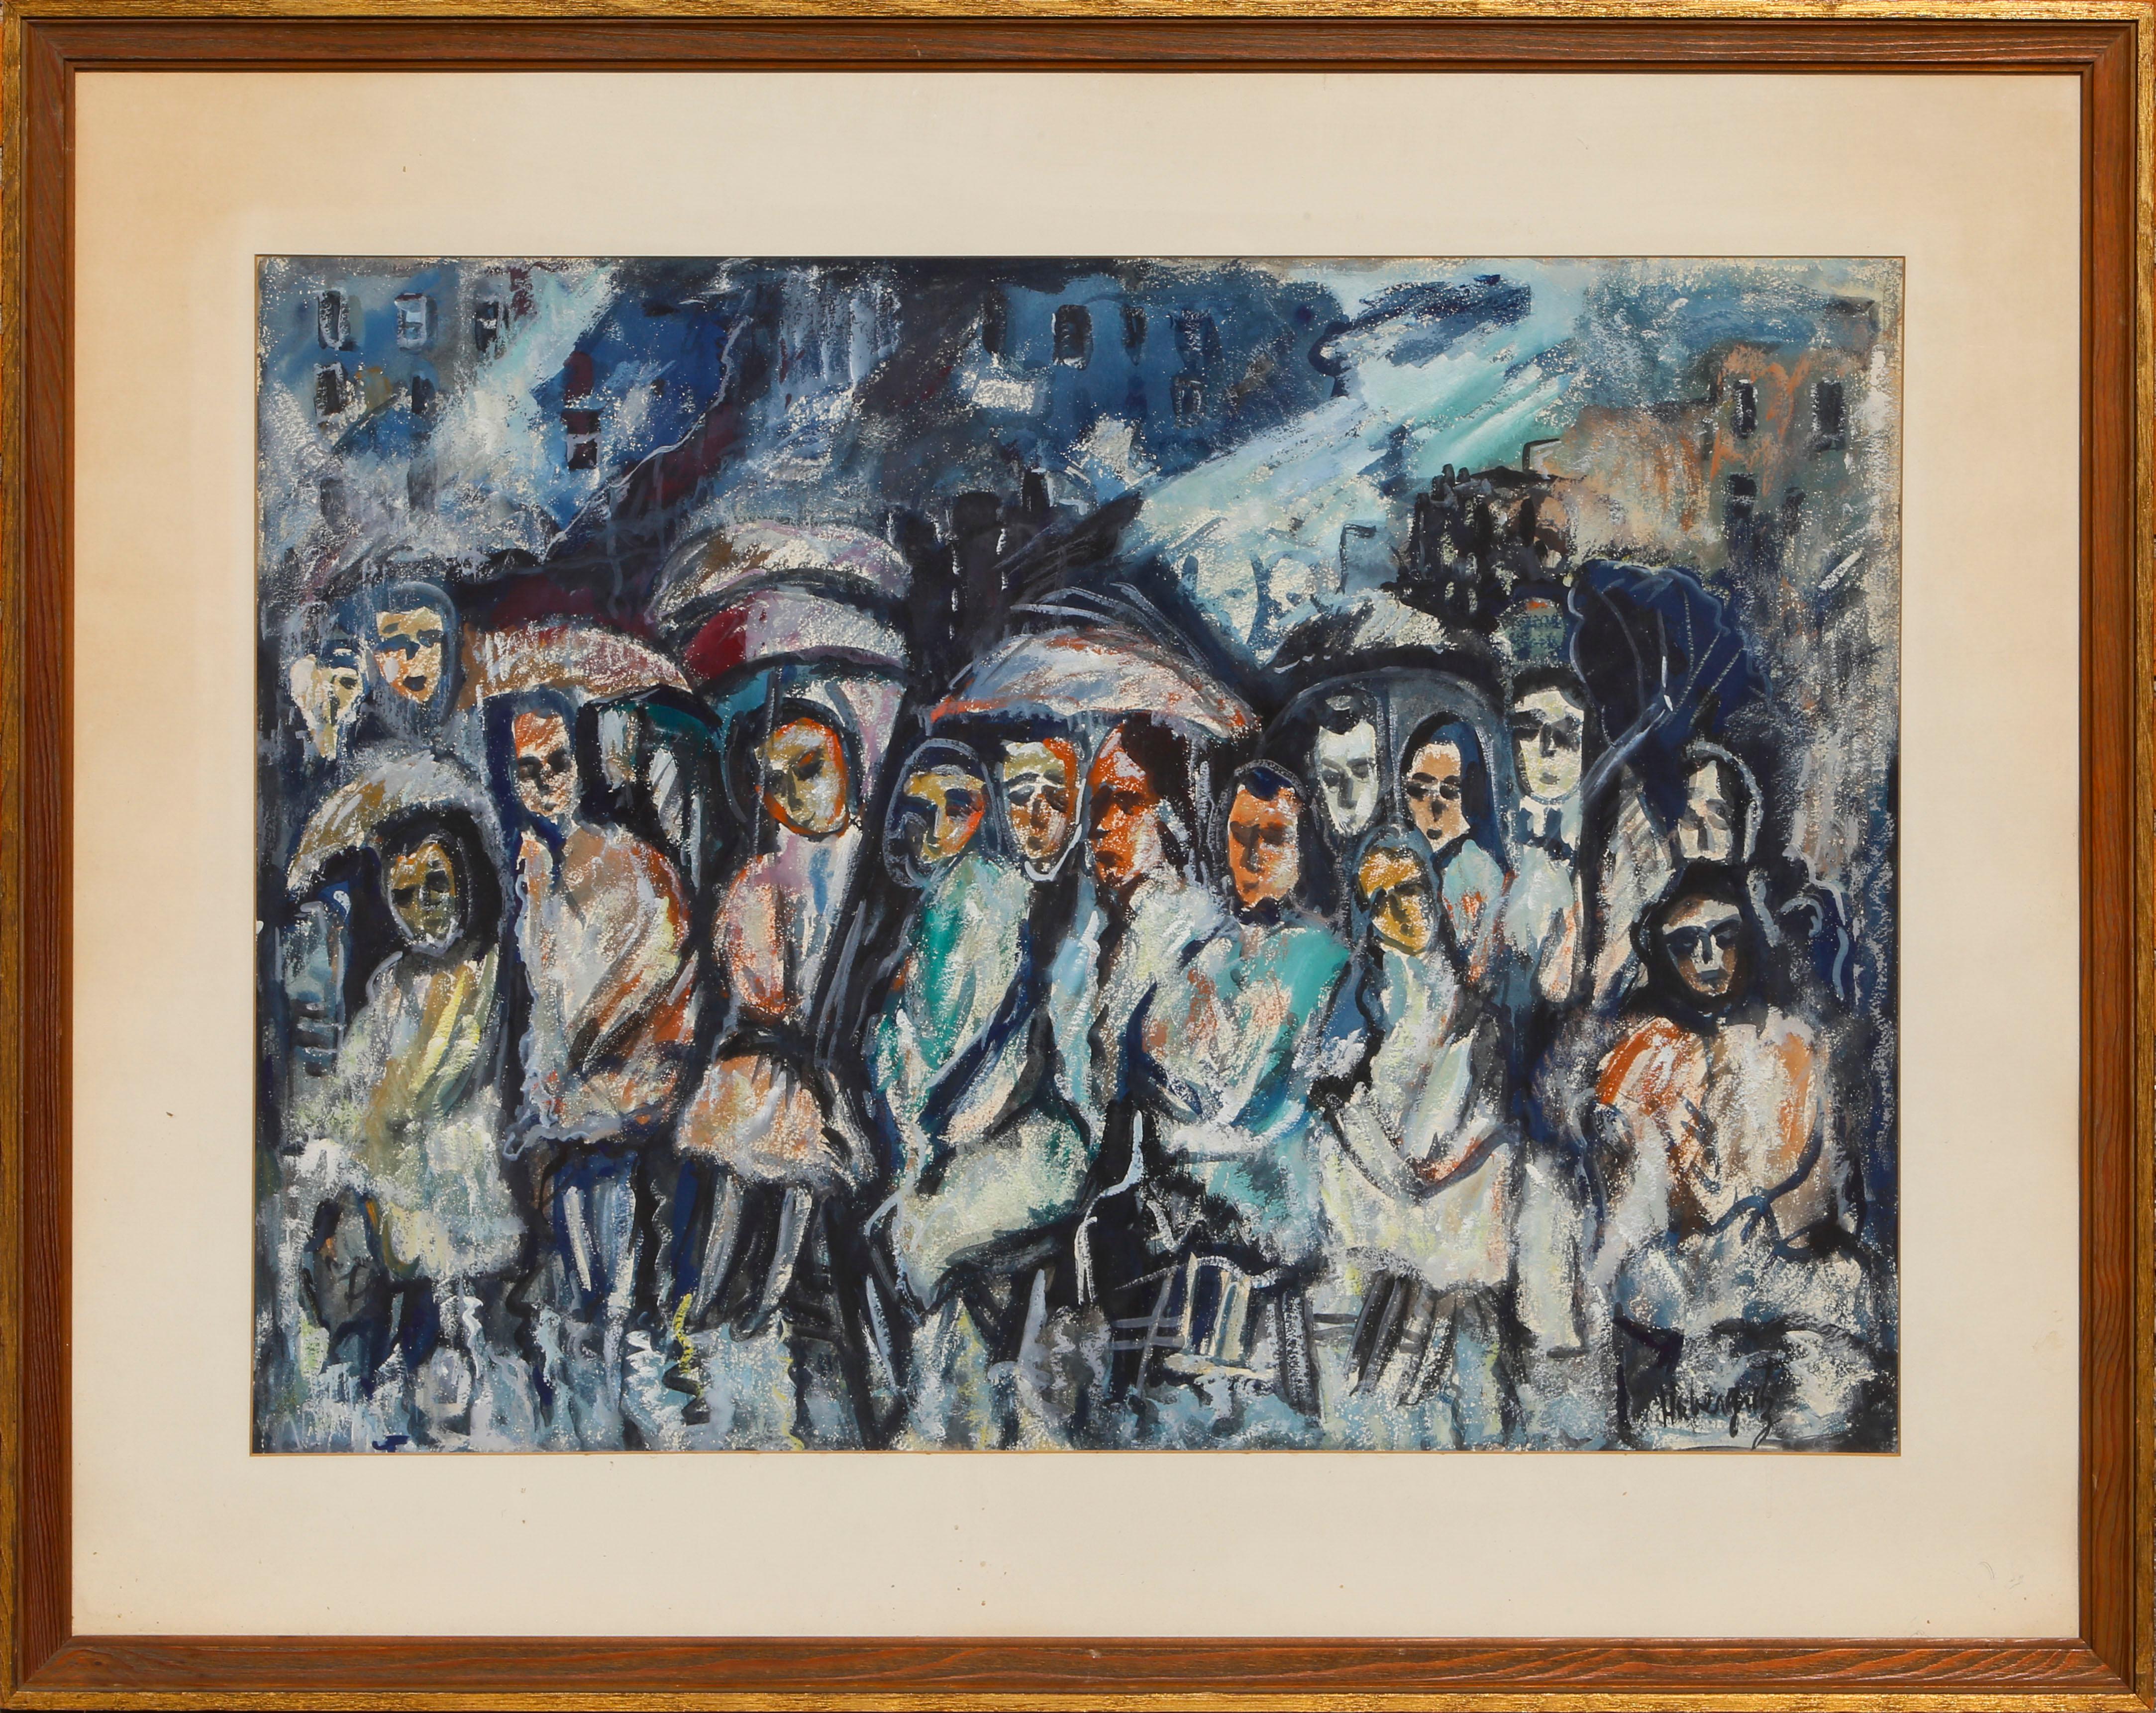 A crowd of people that stretches into infinity, all tinged blue, huddle under umbrellas during a storm and face the viewer. Given the title, it is implied that the viewer stands in the place of the musician(s) at this concert, staring out at the